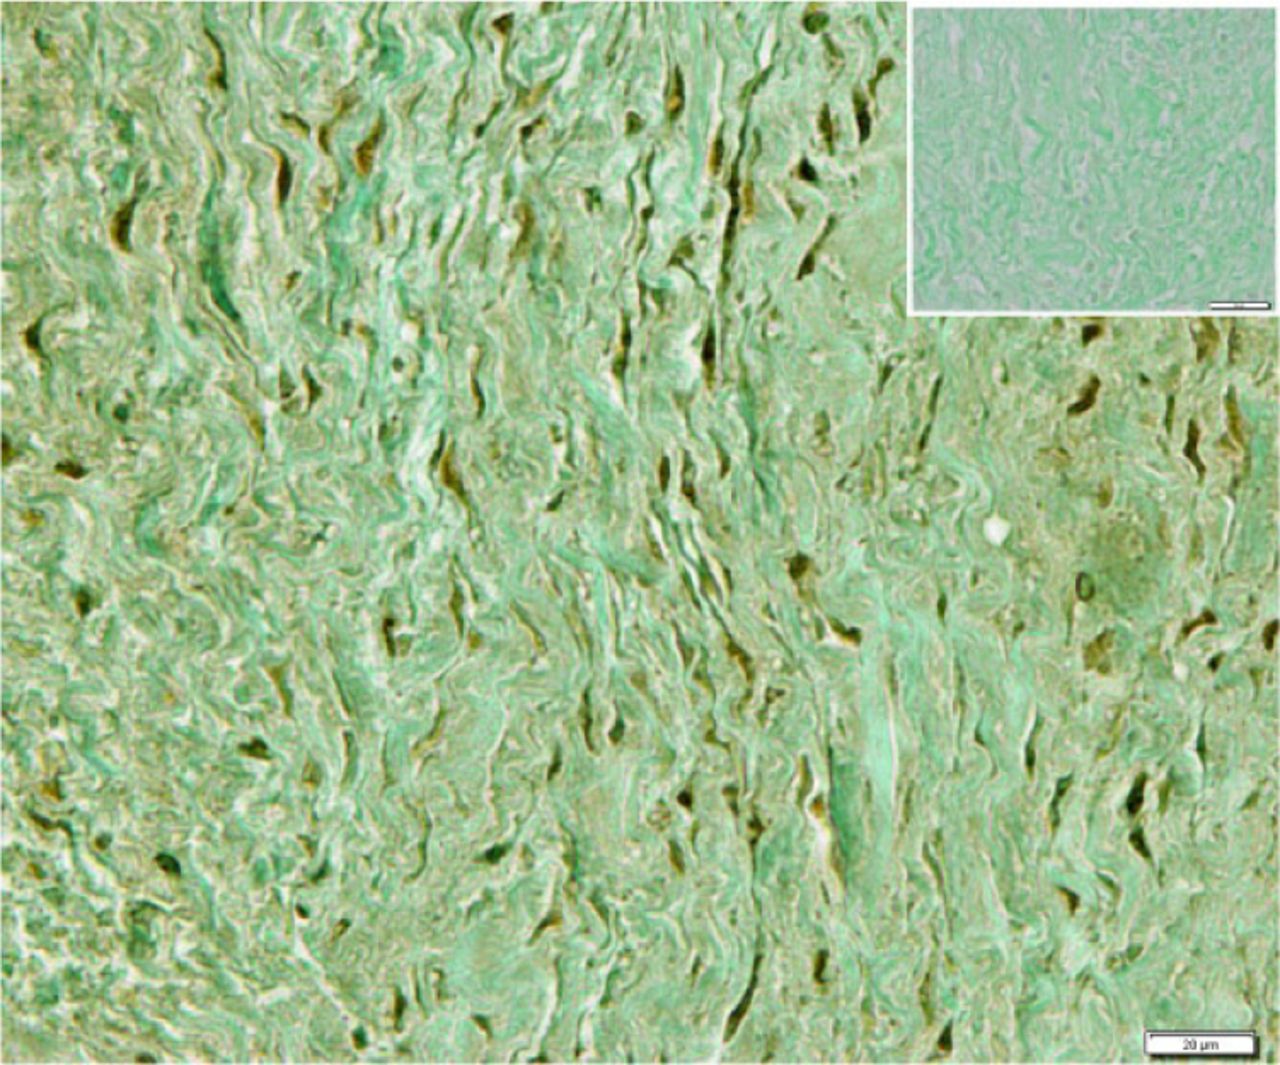 Fig. 4 
            Immunohistochemical localisation of runt-related transcription factor 2 within the biomembrane. Insert upper right shows an adjacent section processed as a negative control (Bar = 20 µm).
          